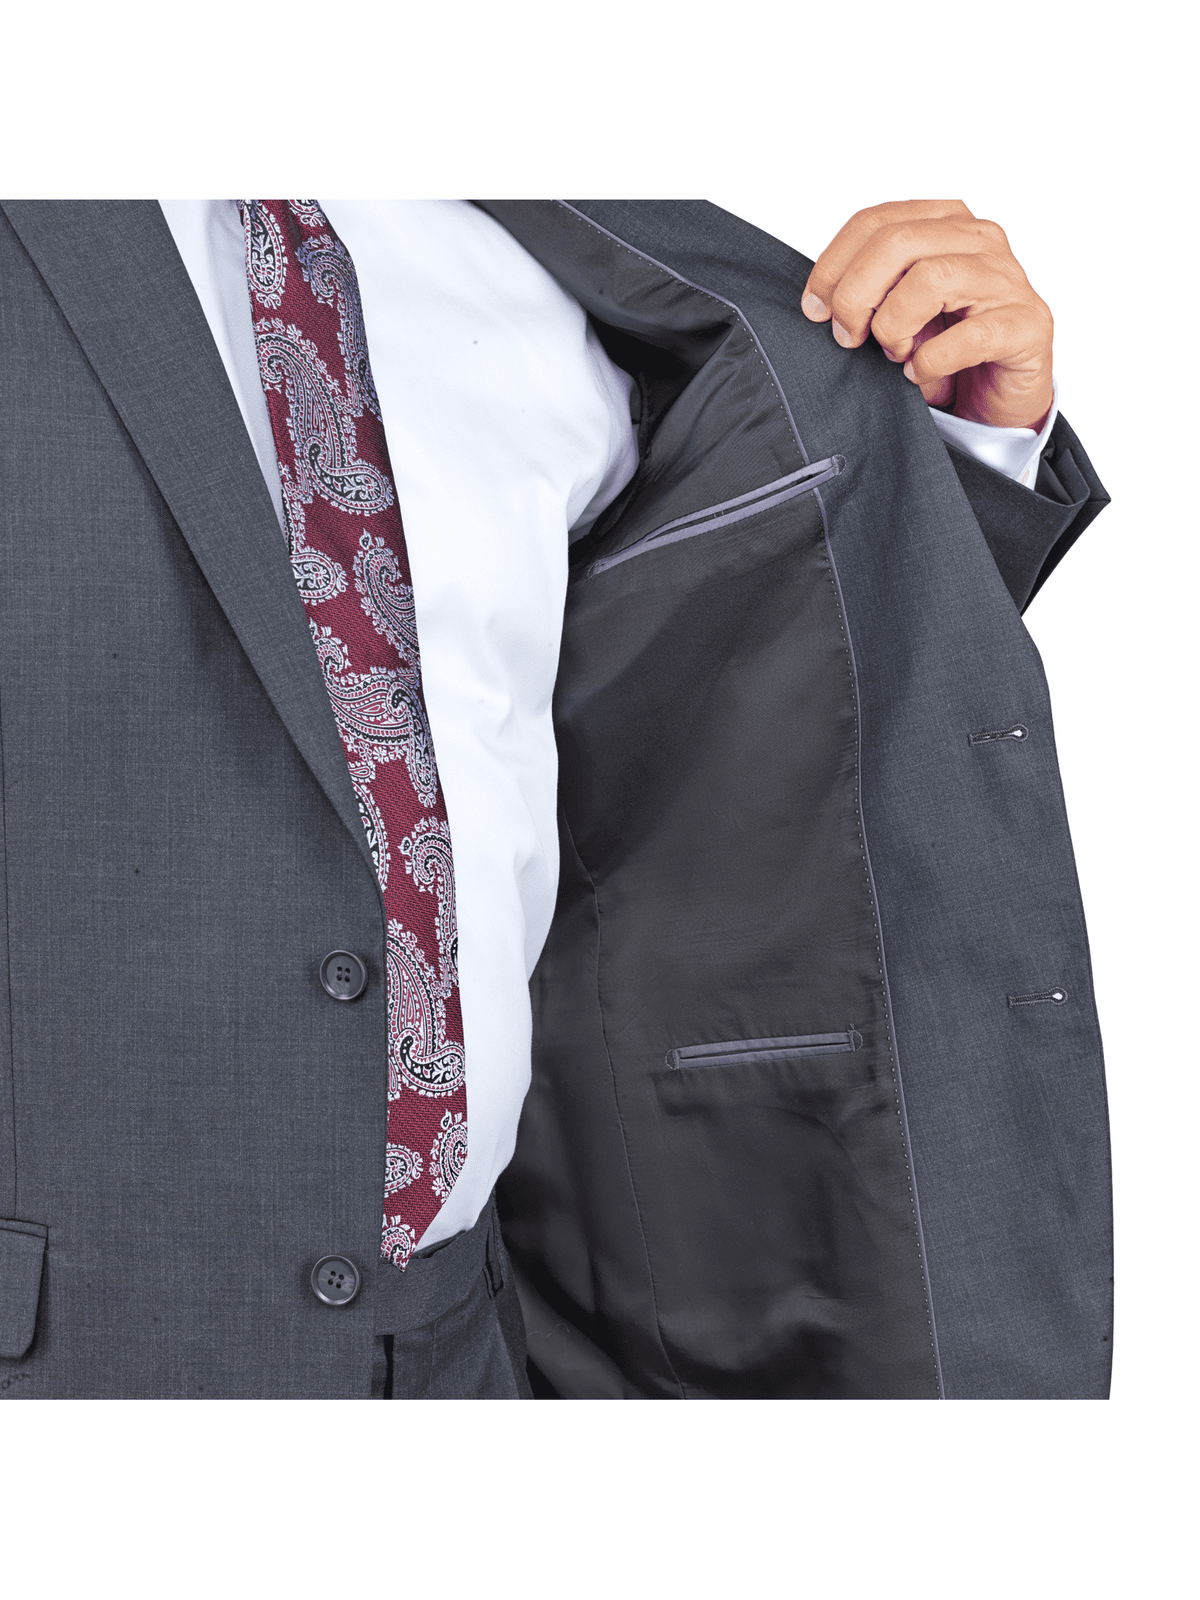 lining of charcoal gray 100% wool suit jacket